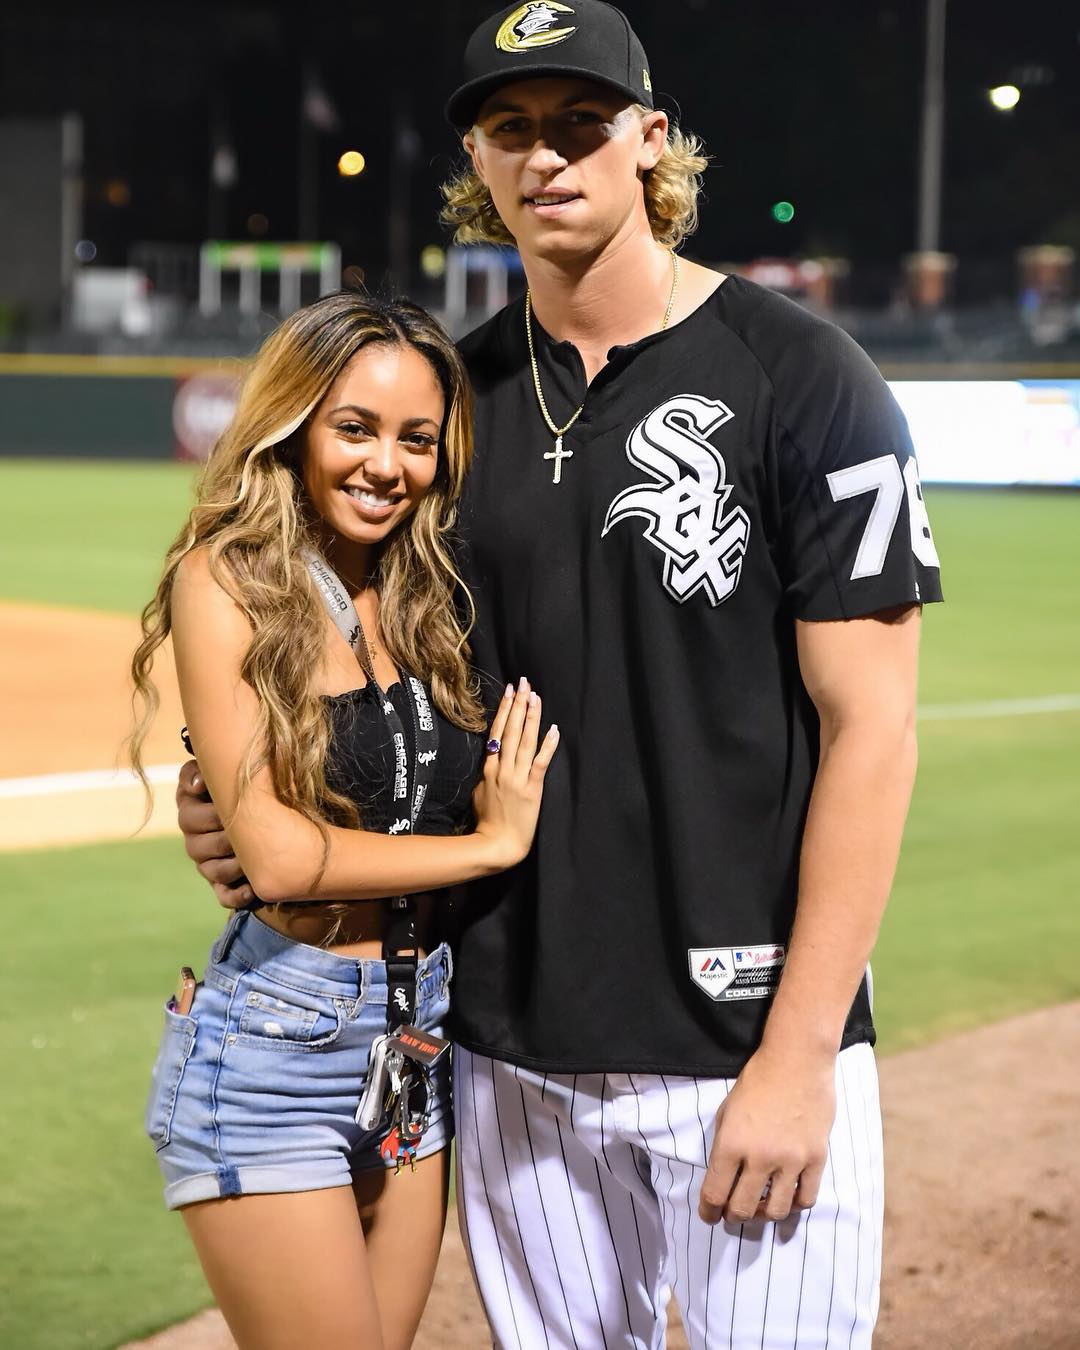 Michael Kopech Files for Divorce from Pregnant Riverdale Star Vanessa  Morgan After 6 Months of Marriage